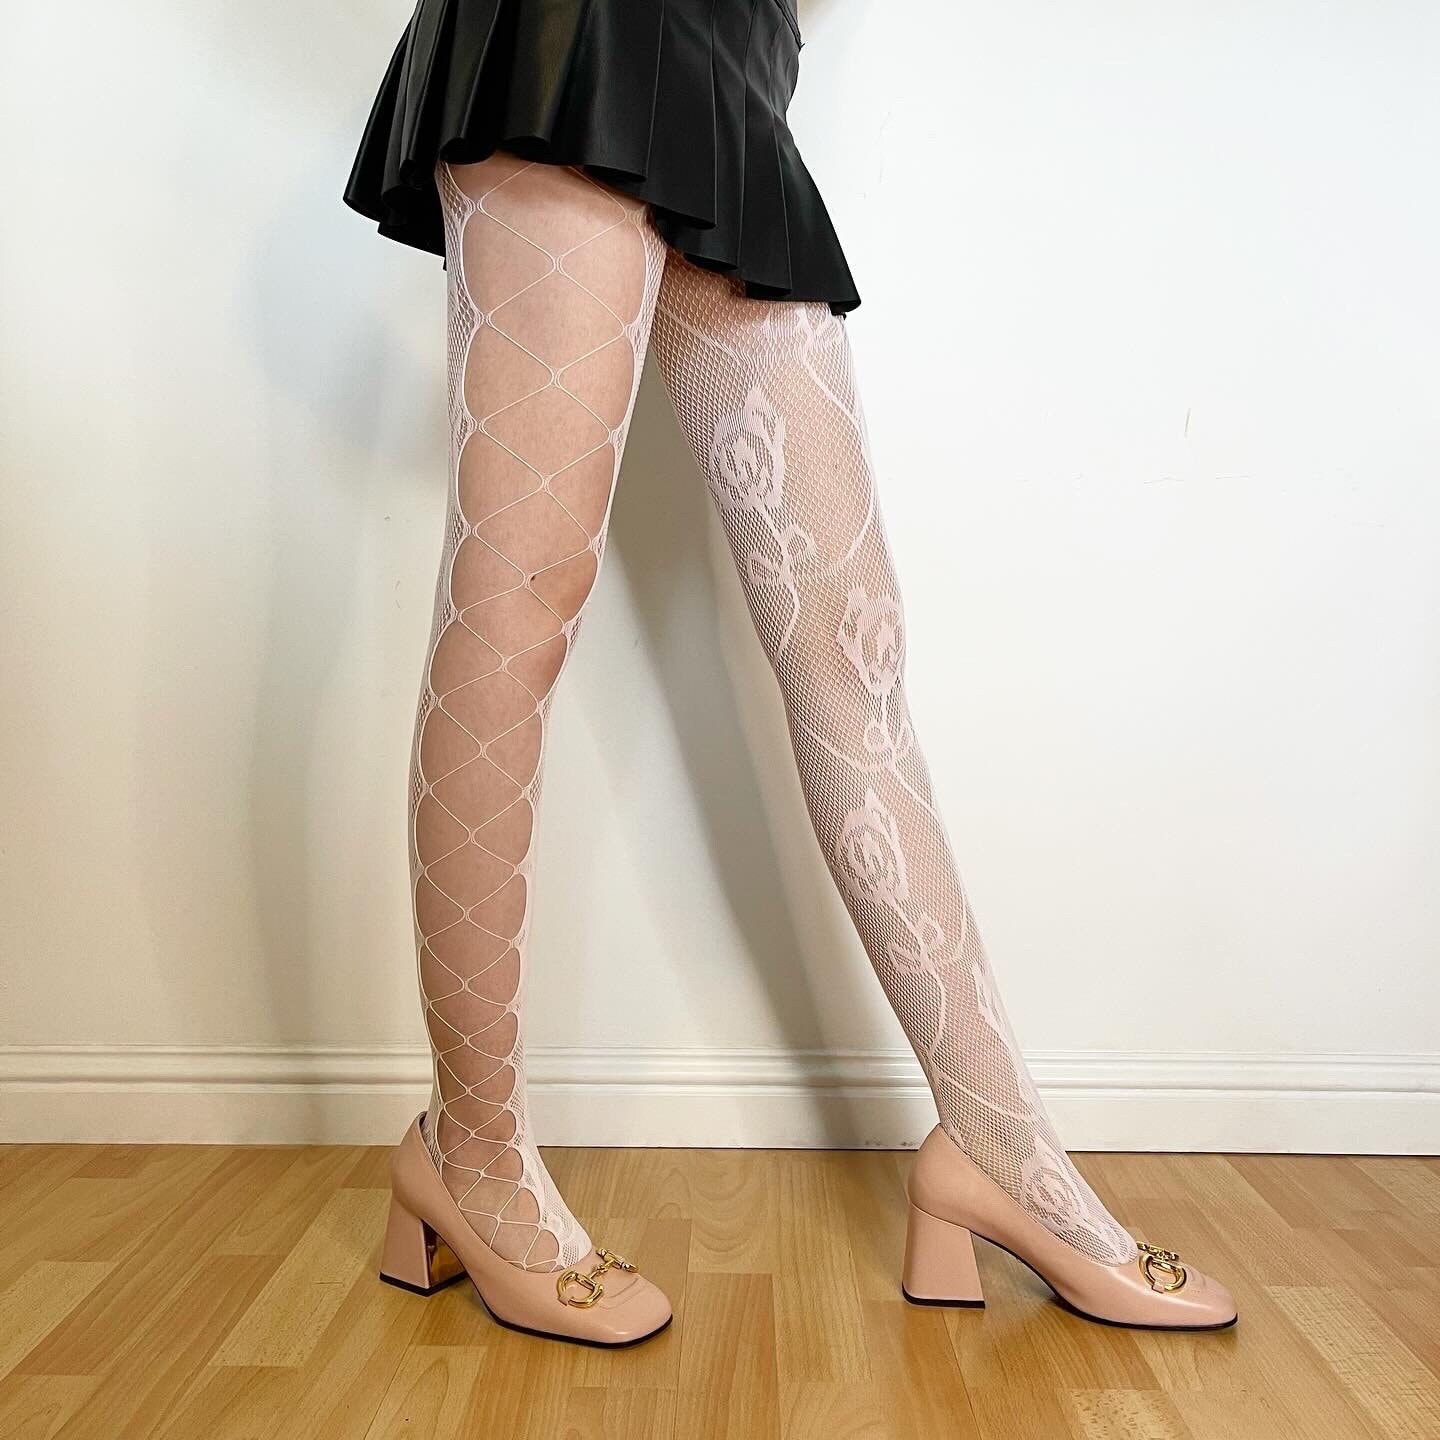 Stella Elyse Floral Stitching Fishnet Pantyhose (Queen, Black) at   Women's Clothing store